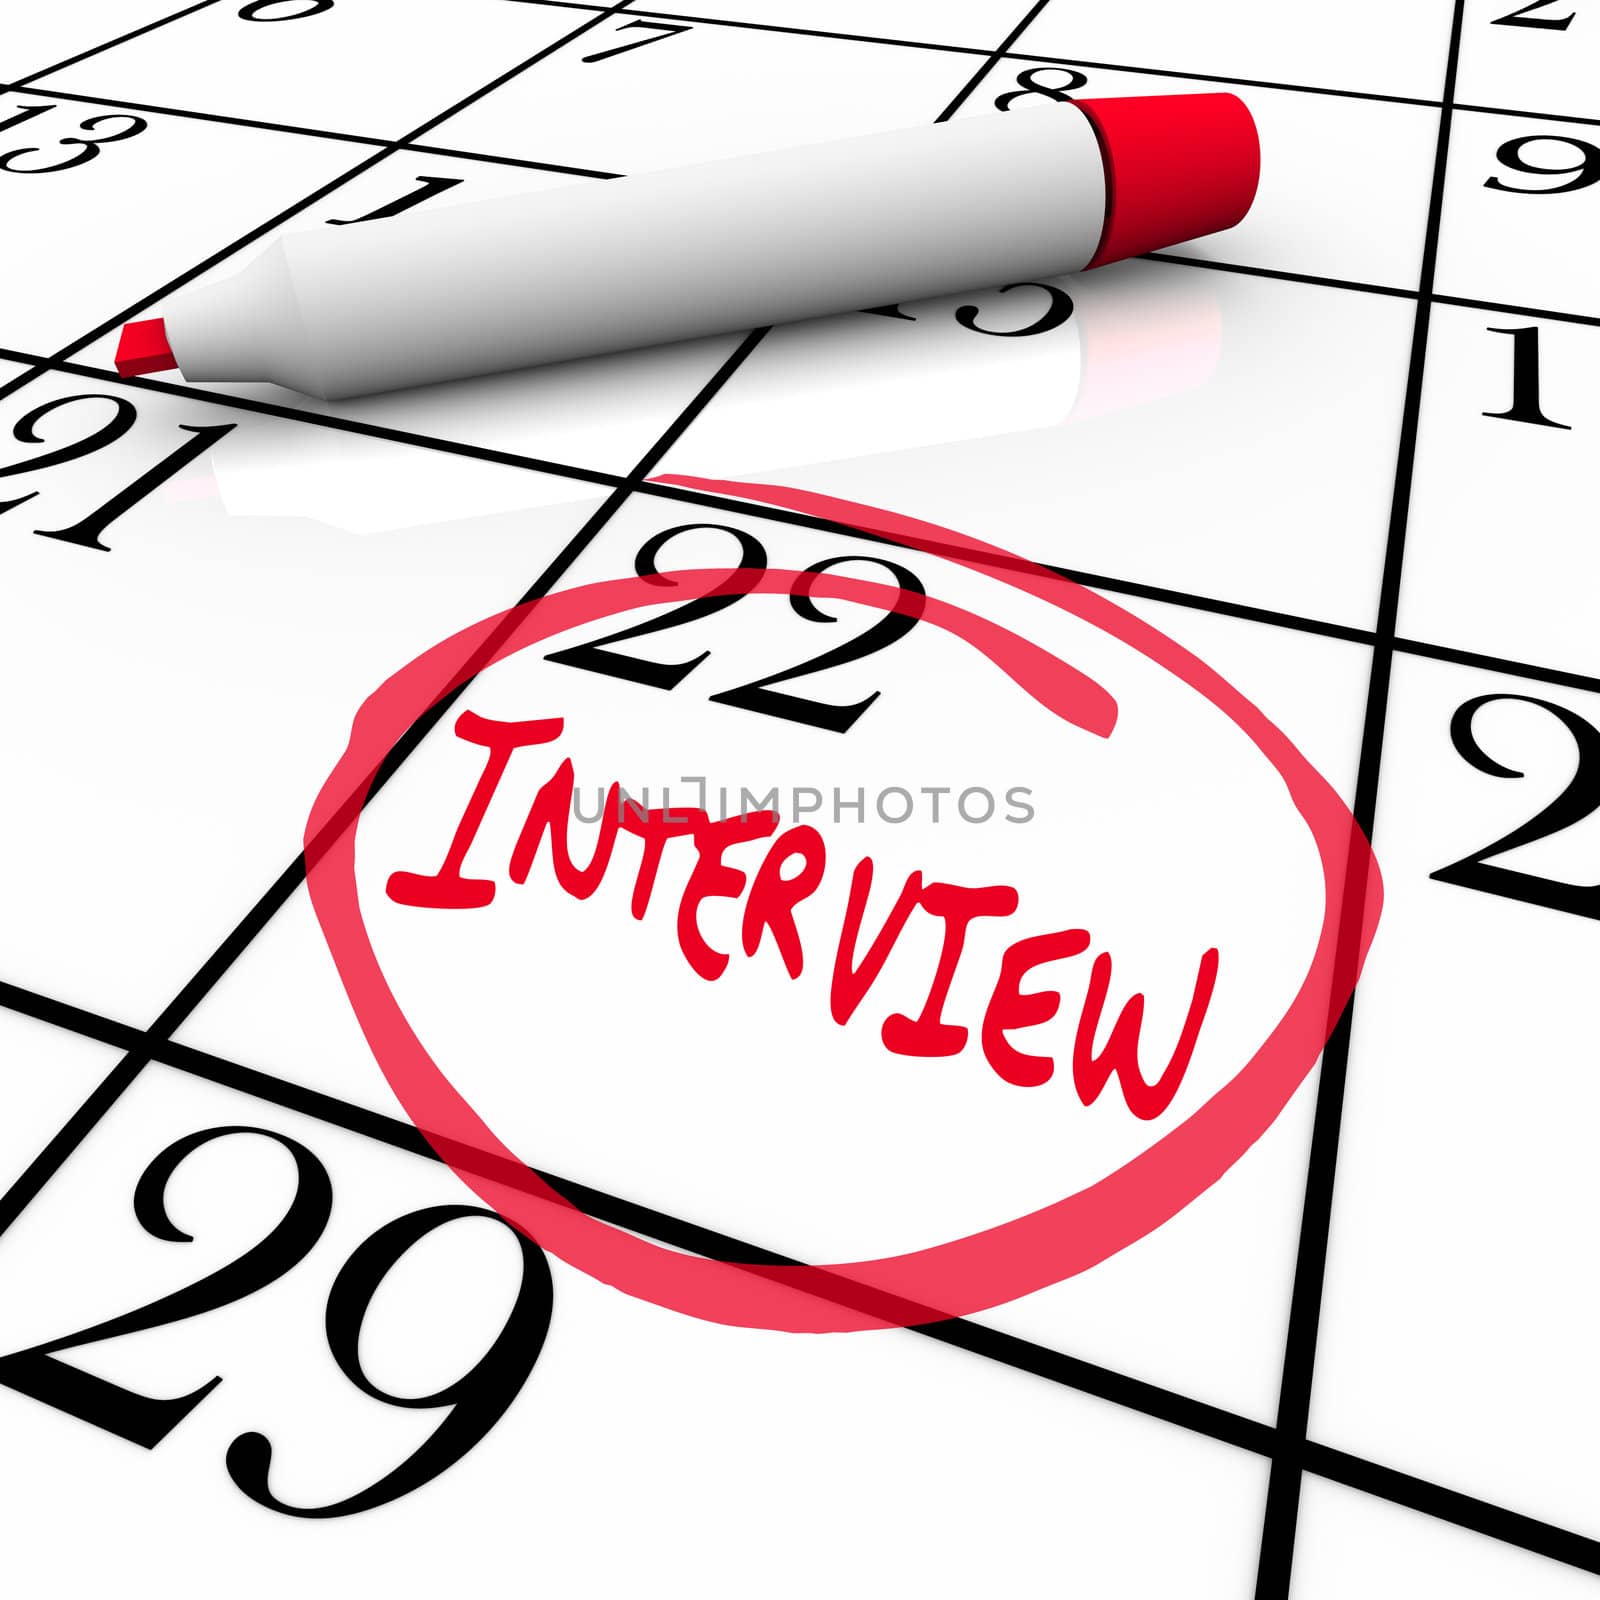 Interview Day Circled on Calendar - Meet New Employer by iQoncept